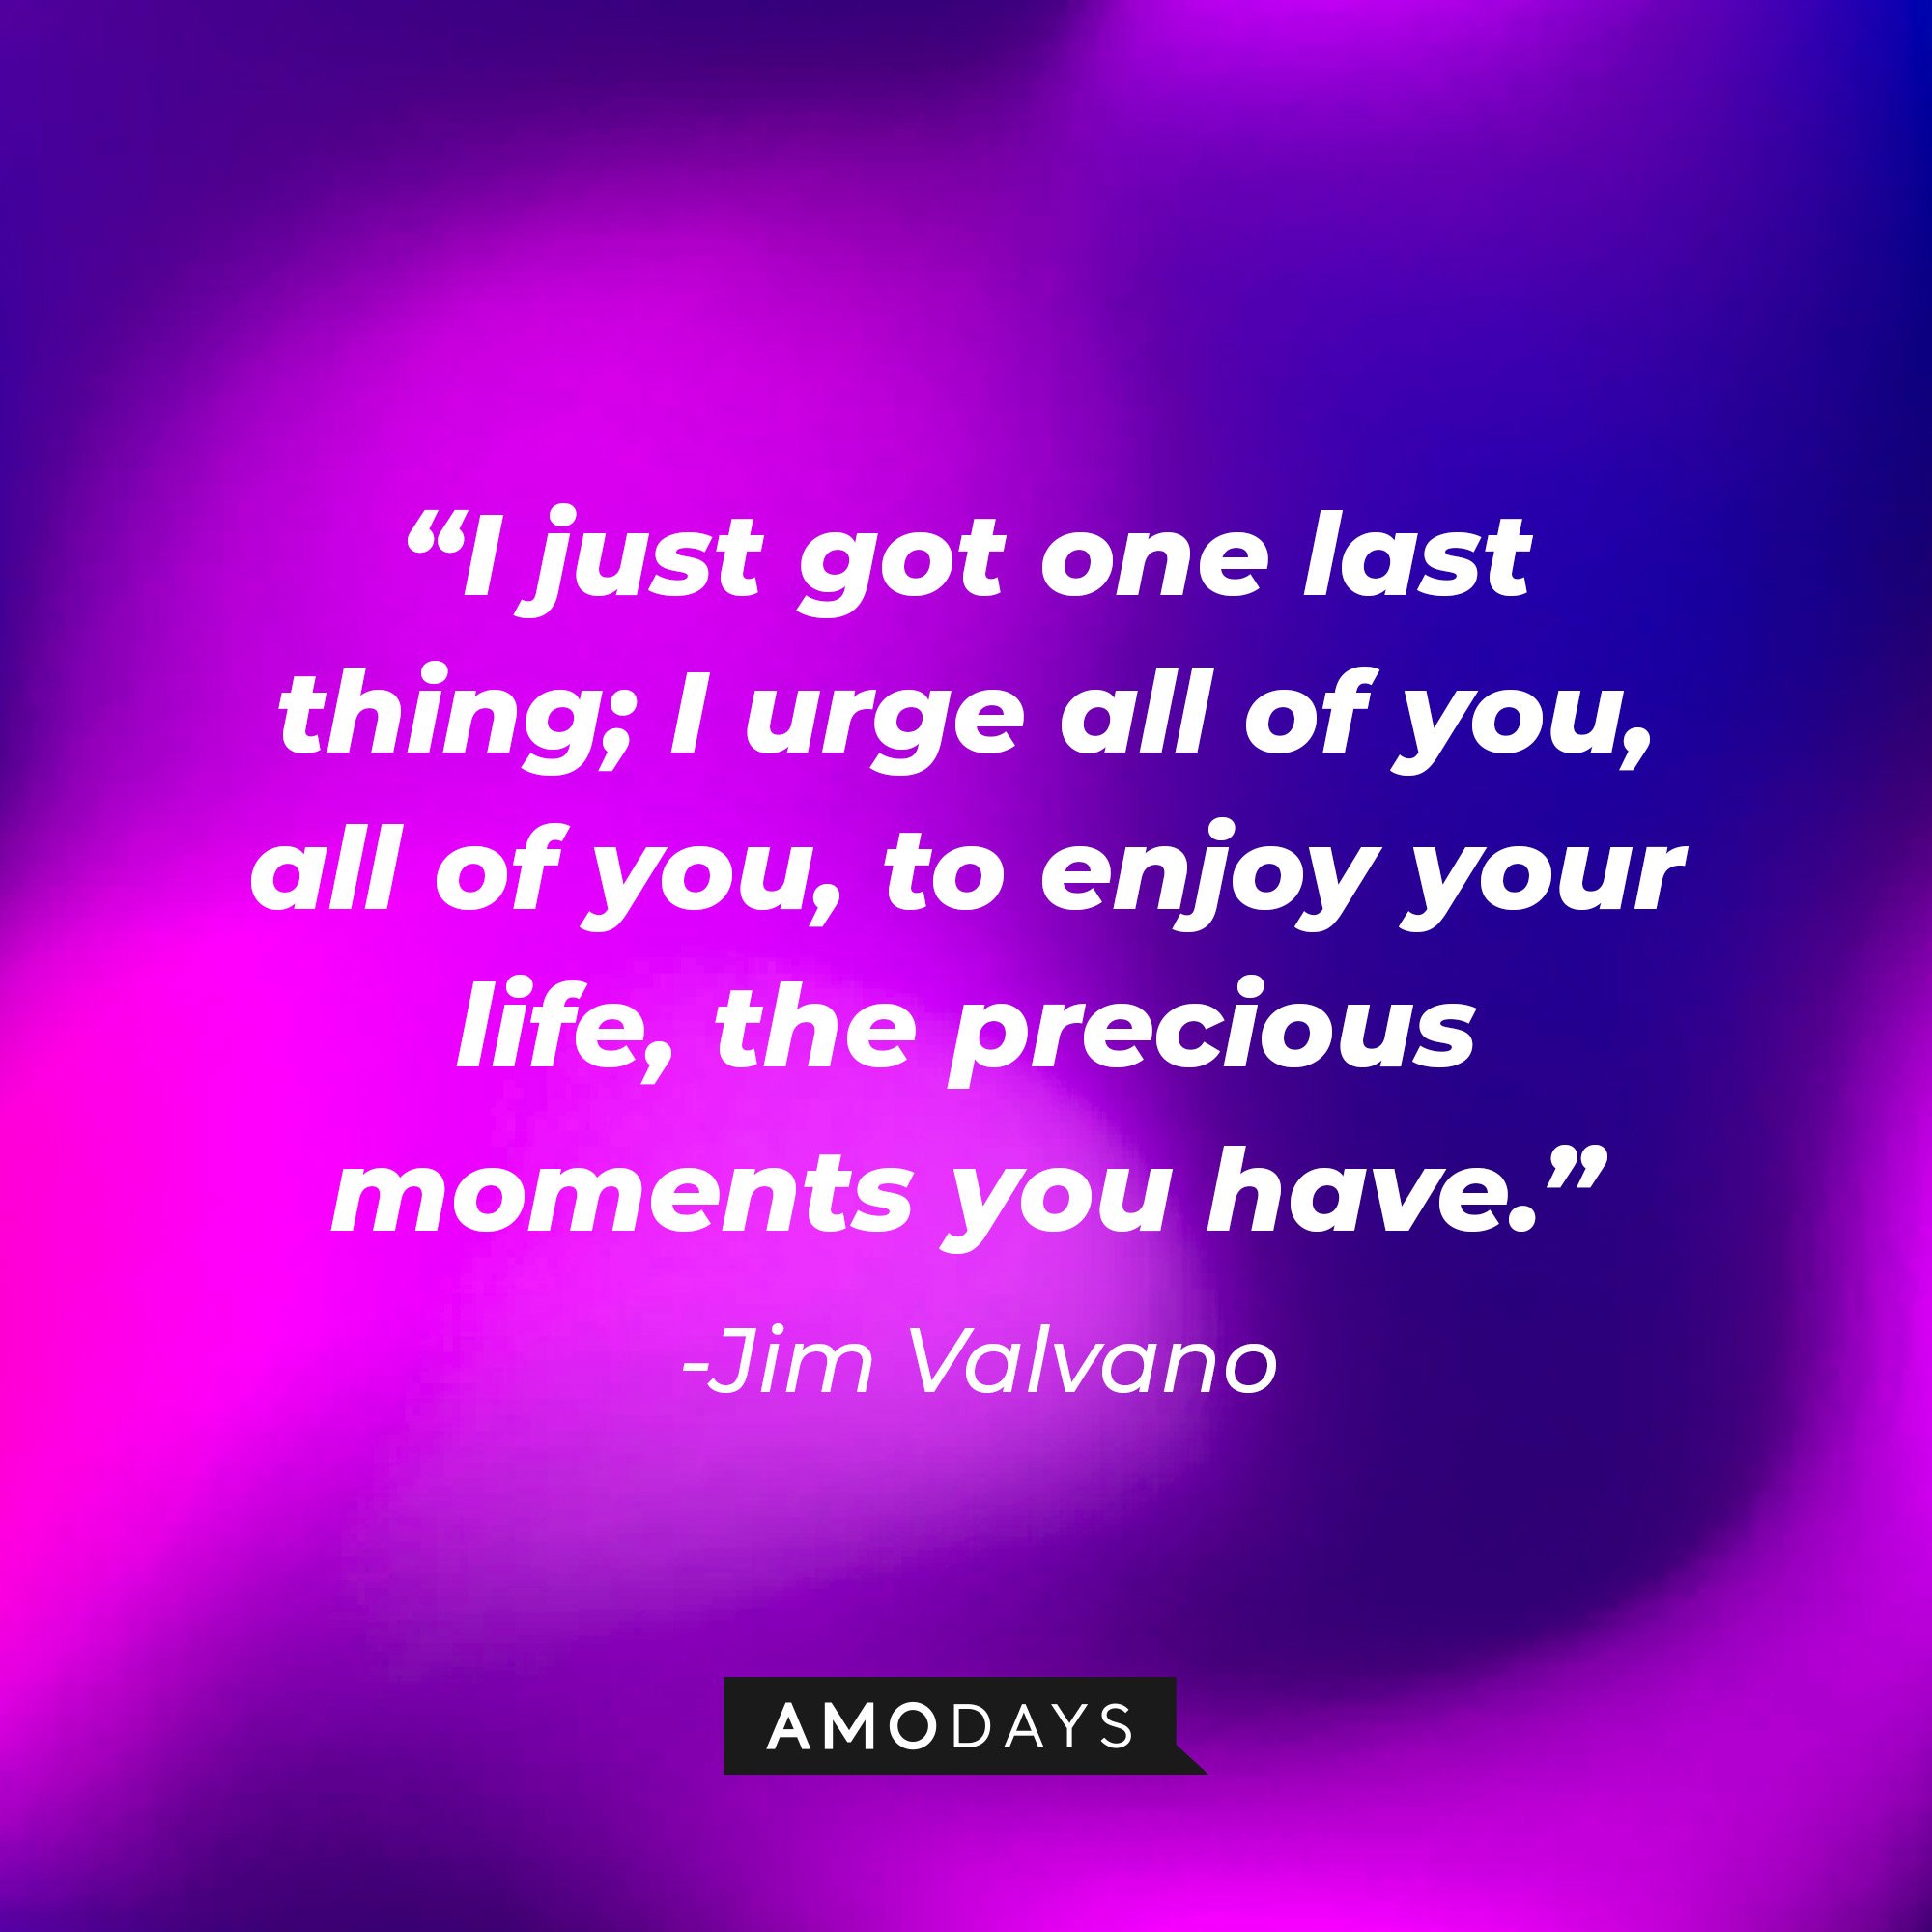 Jim Valvano’s quote: "I just got one last thing; I urge all of you, all of you, to enjoy your life, the precious moments you have." | Image: AmoDays